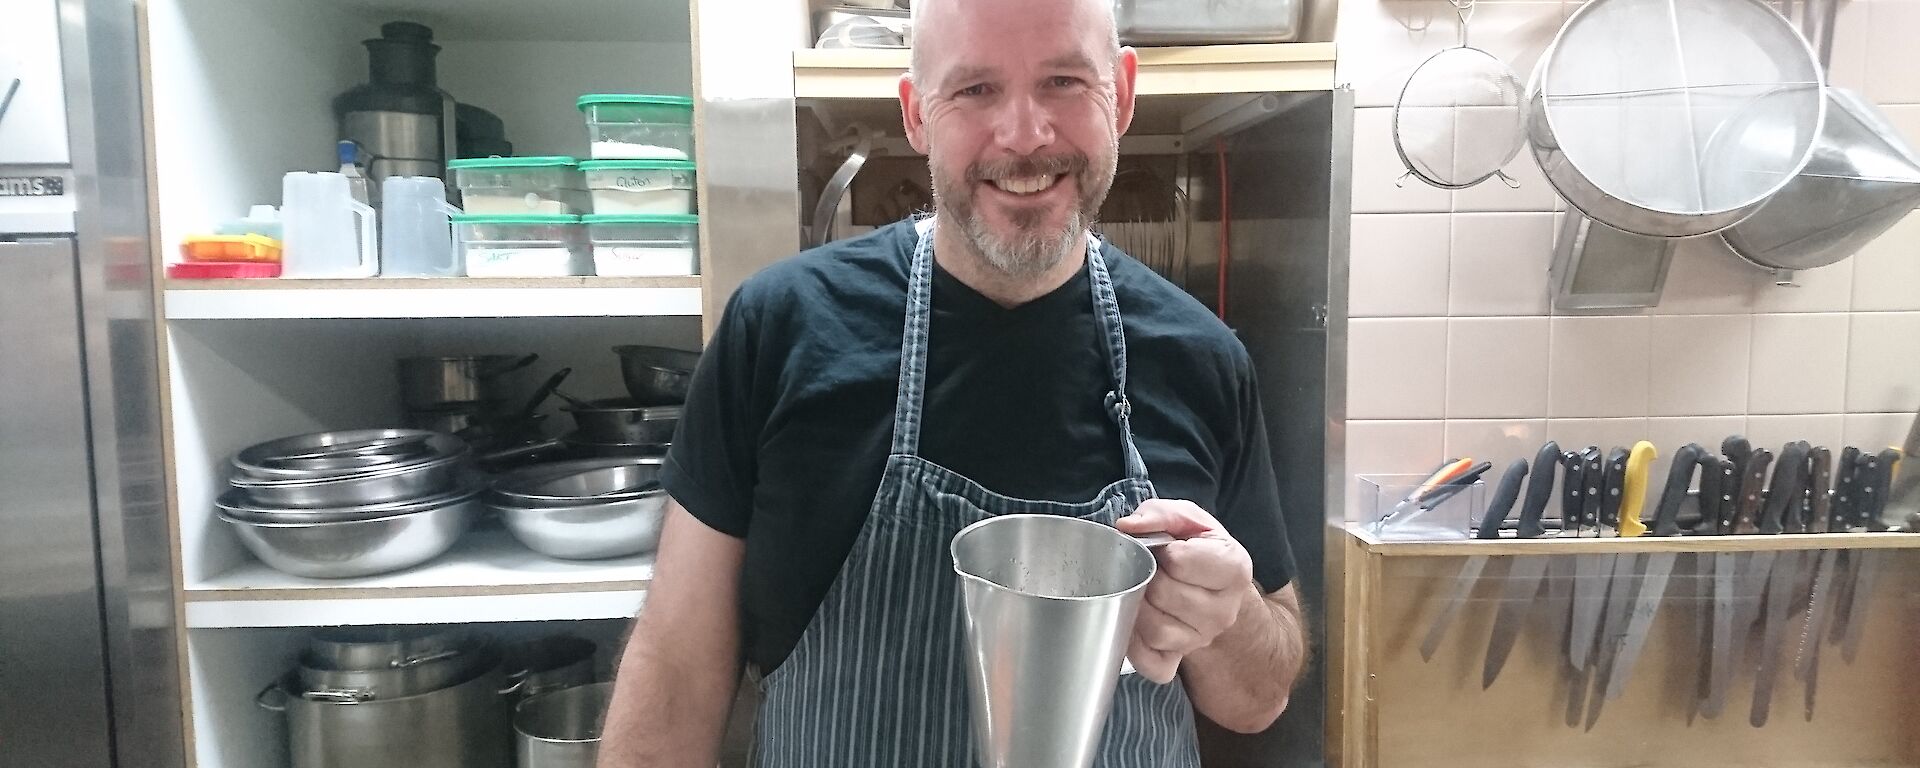 Andrew the chef holding a jug in the kitchen.